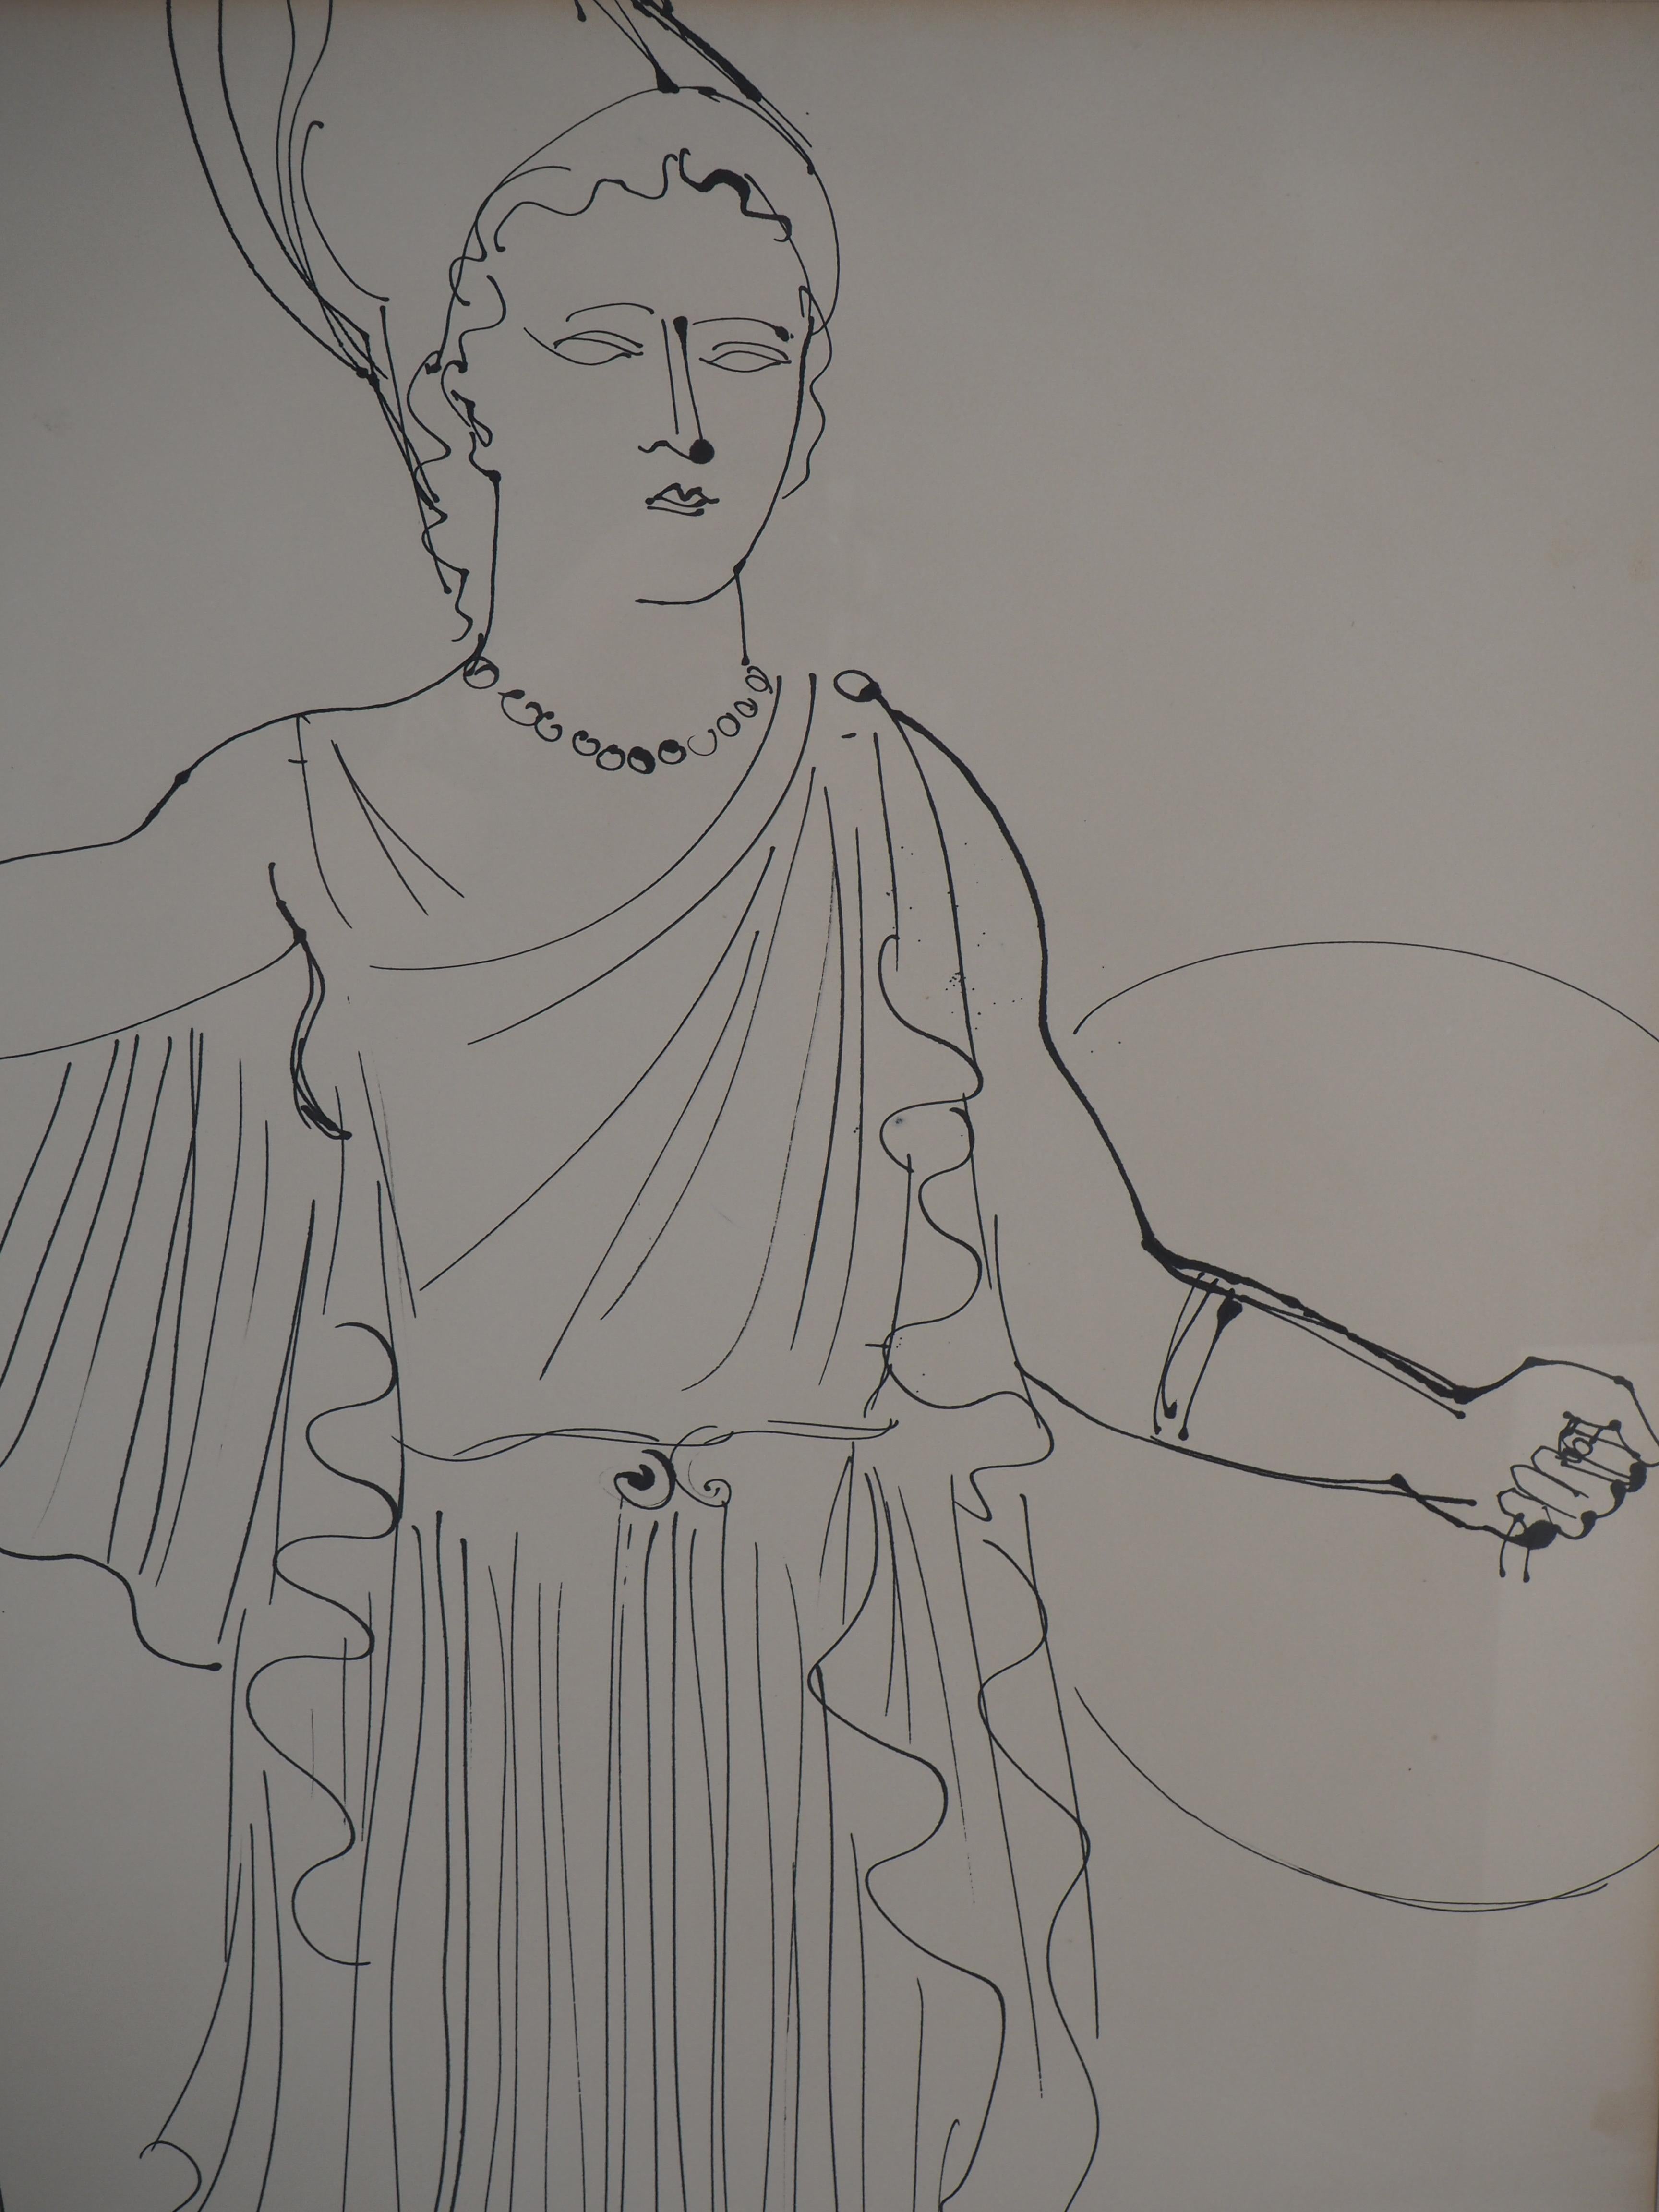 Fee Electricite, Athena Goddess of Wisdom and War - Original Drawing, Handsigned - Modern Art by Raoul Dufy